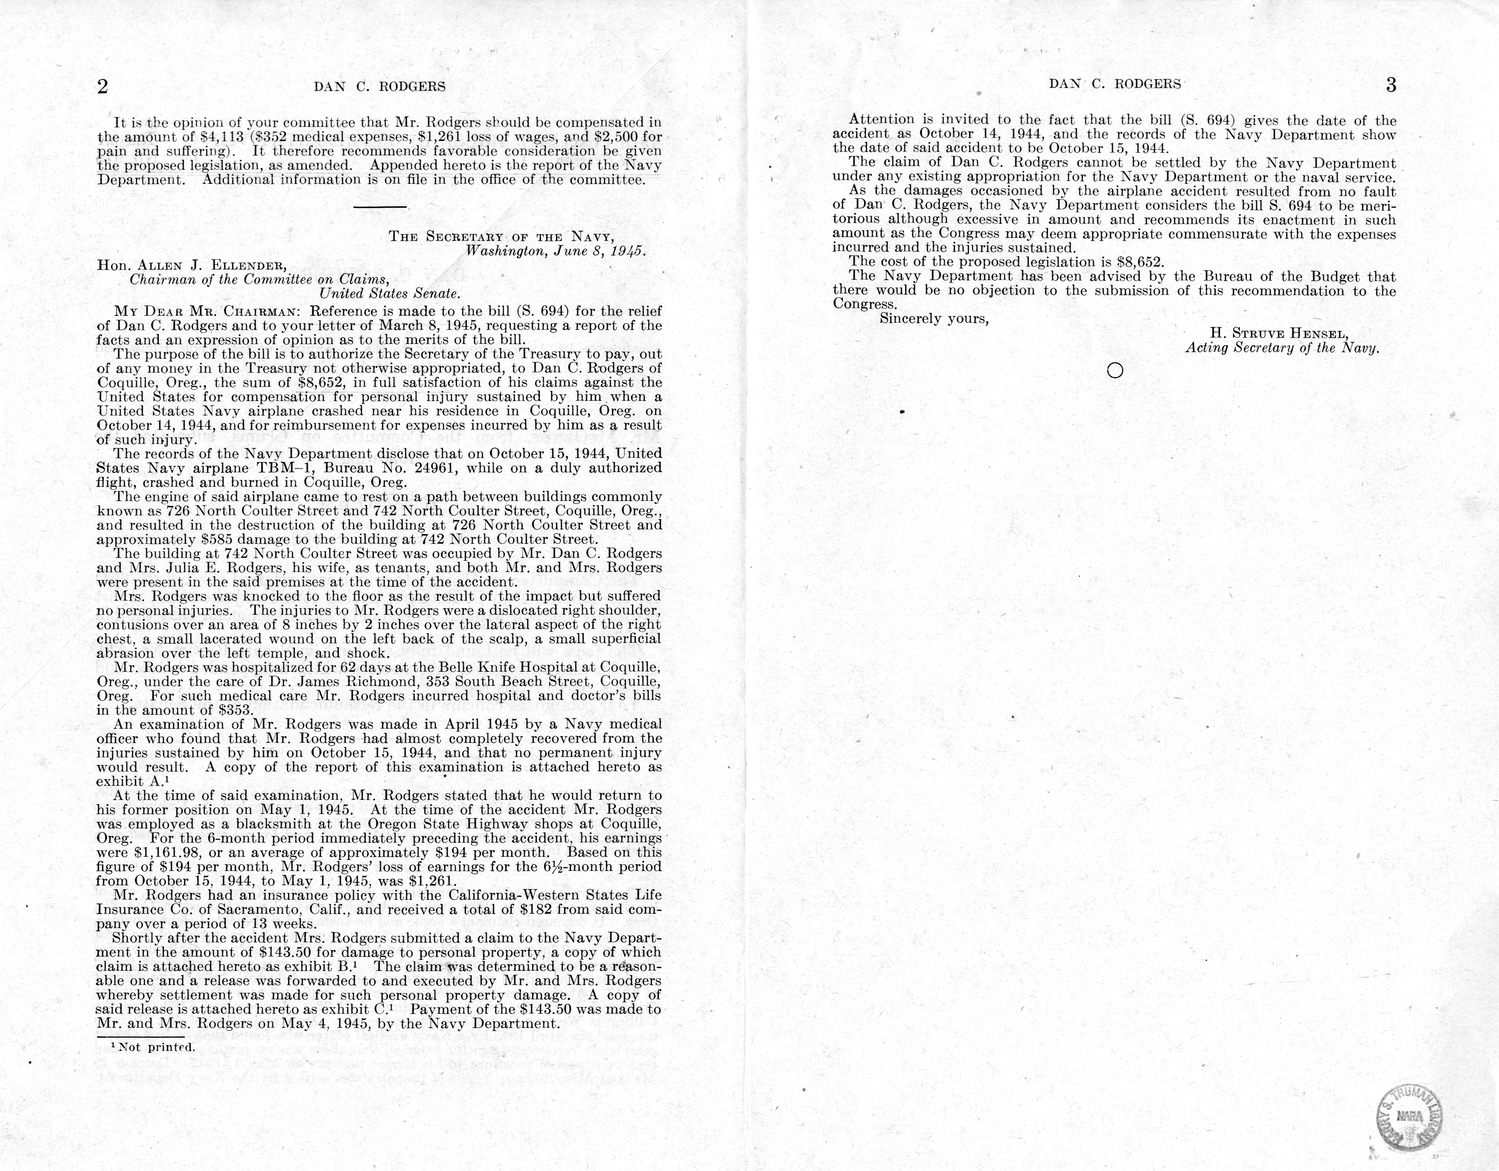 Memorandum from Frederick J. Bailey to M. C. Latta, S. 694, For the Relief of Dan C. Rodgers, with Attachments